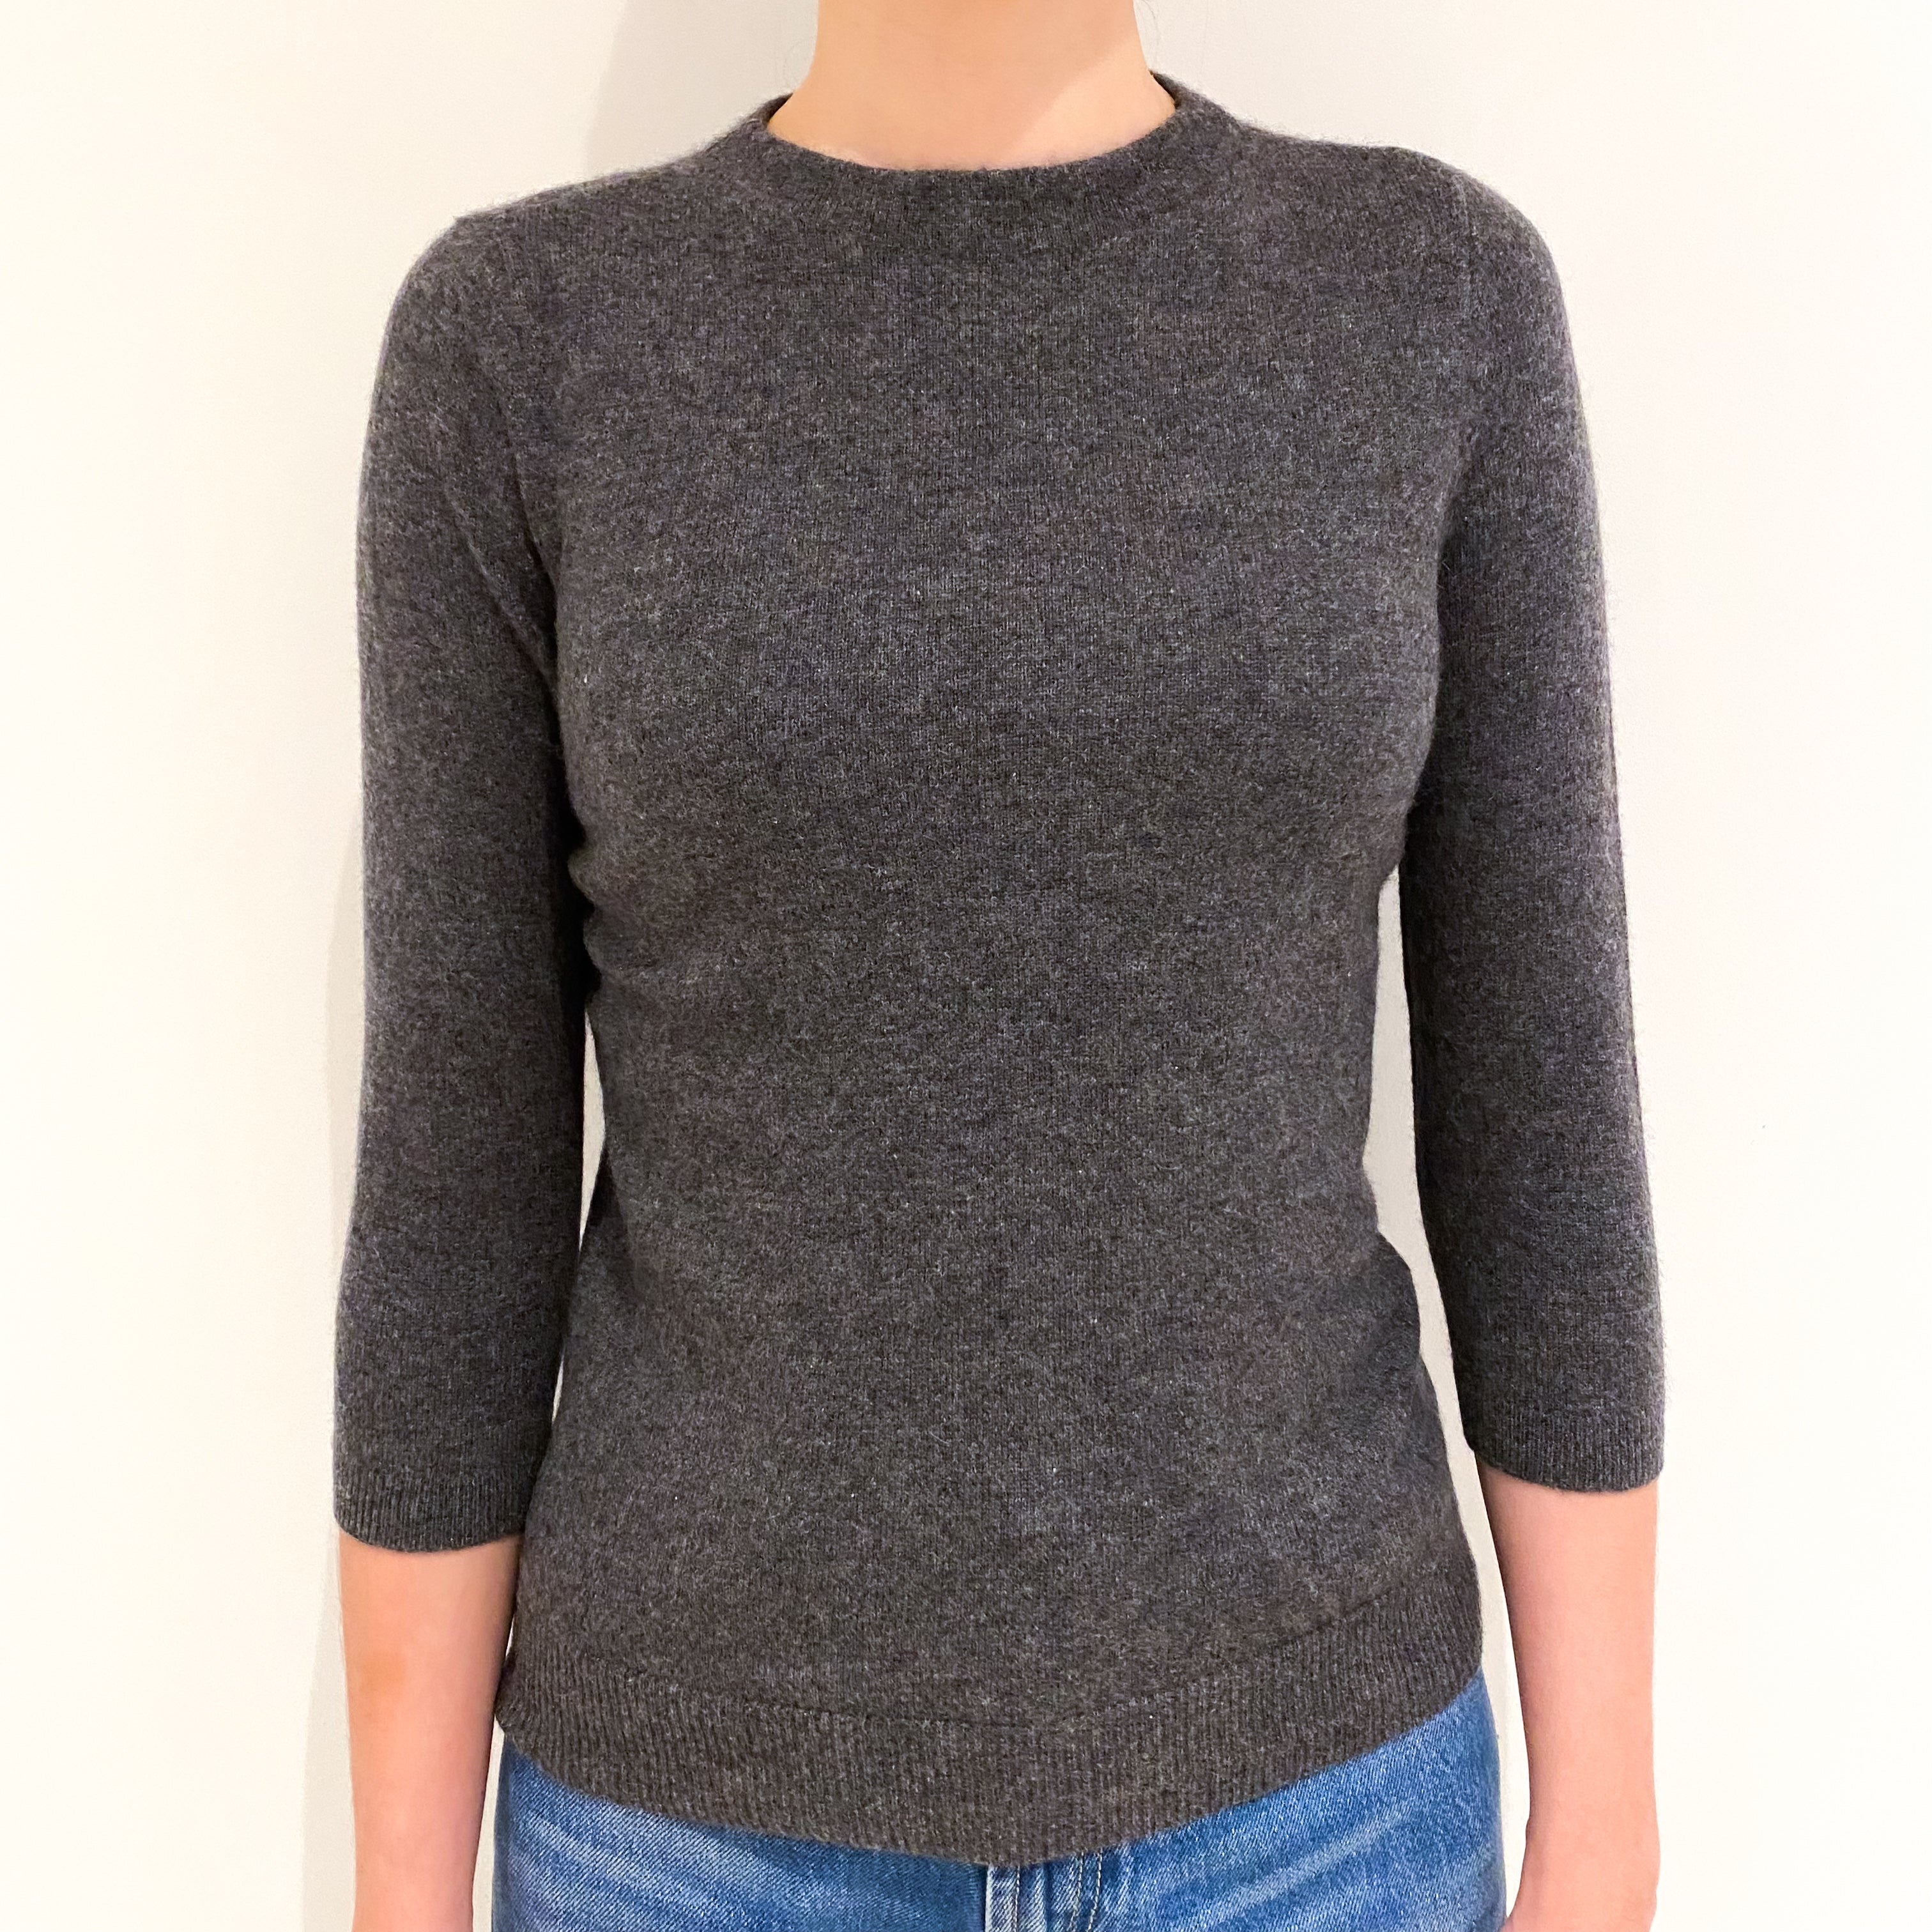 Slate Grey 3/4 Sleeved Cashmere Crew Neck Jumper Extra Small